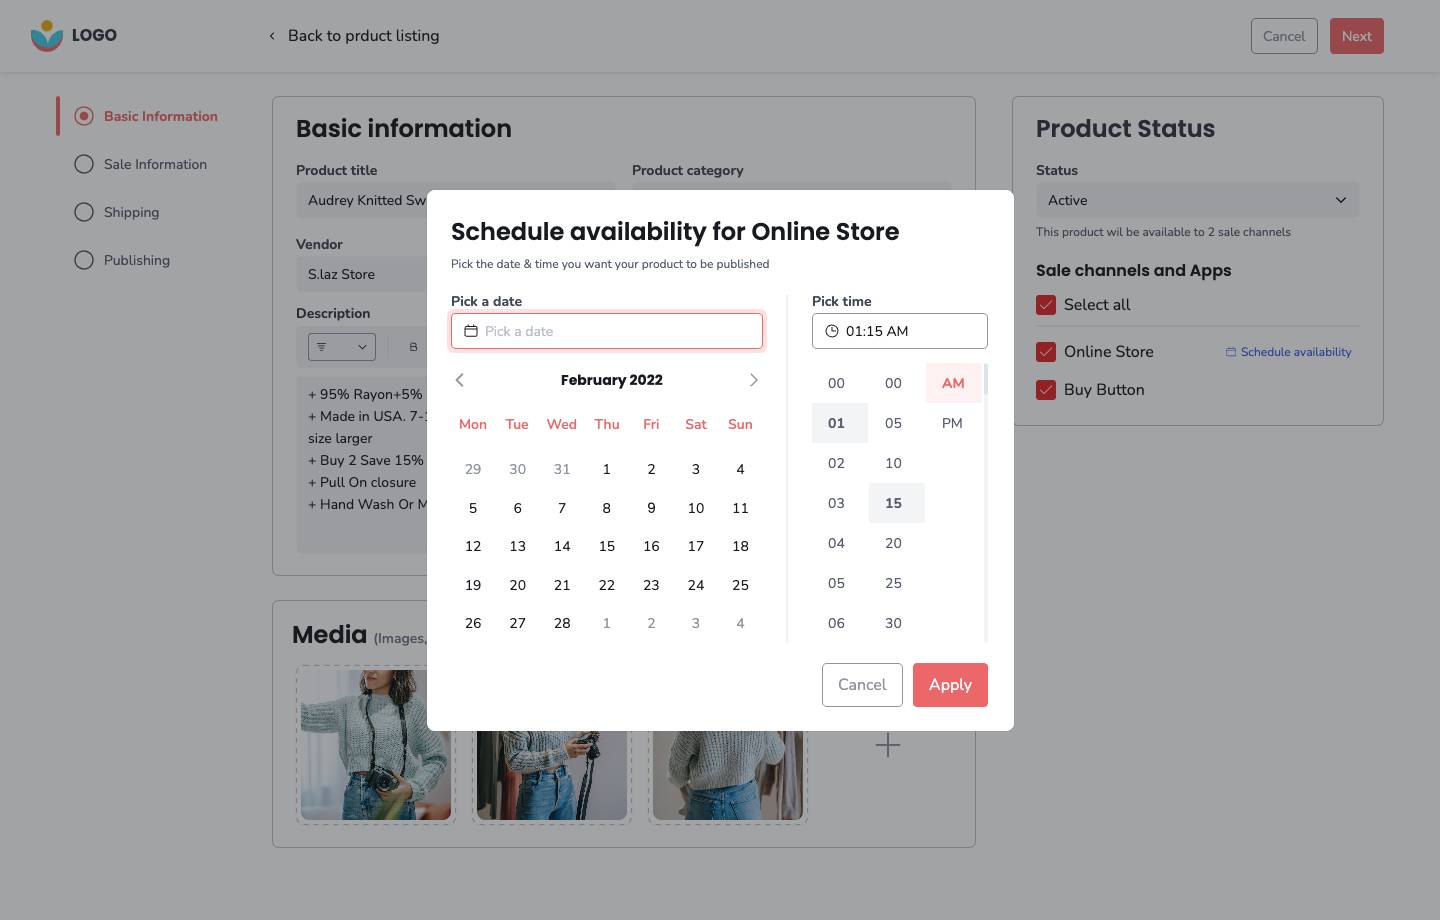 Create product - Select date for publishing